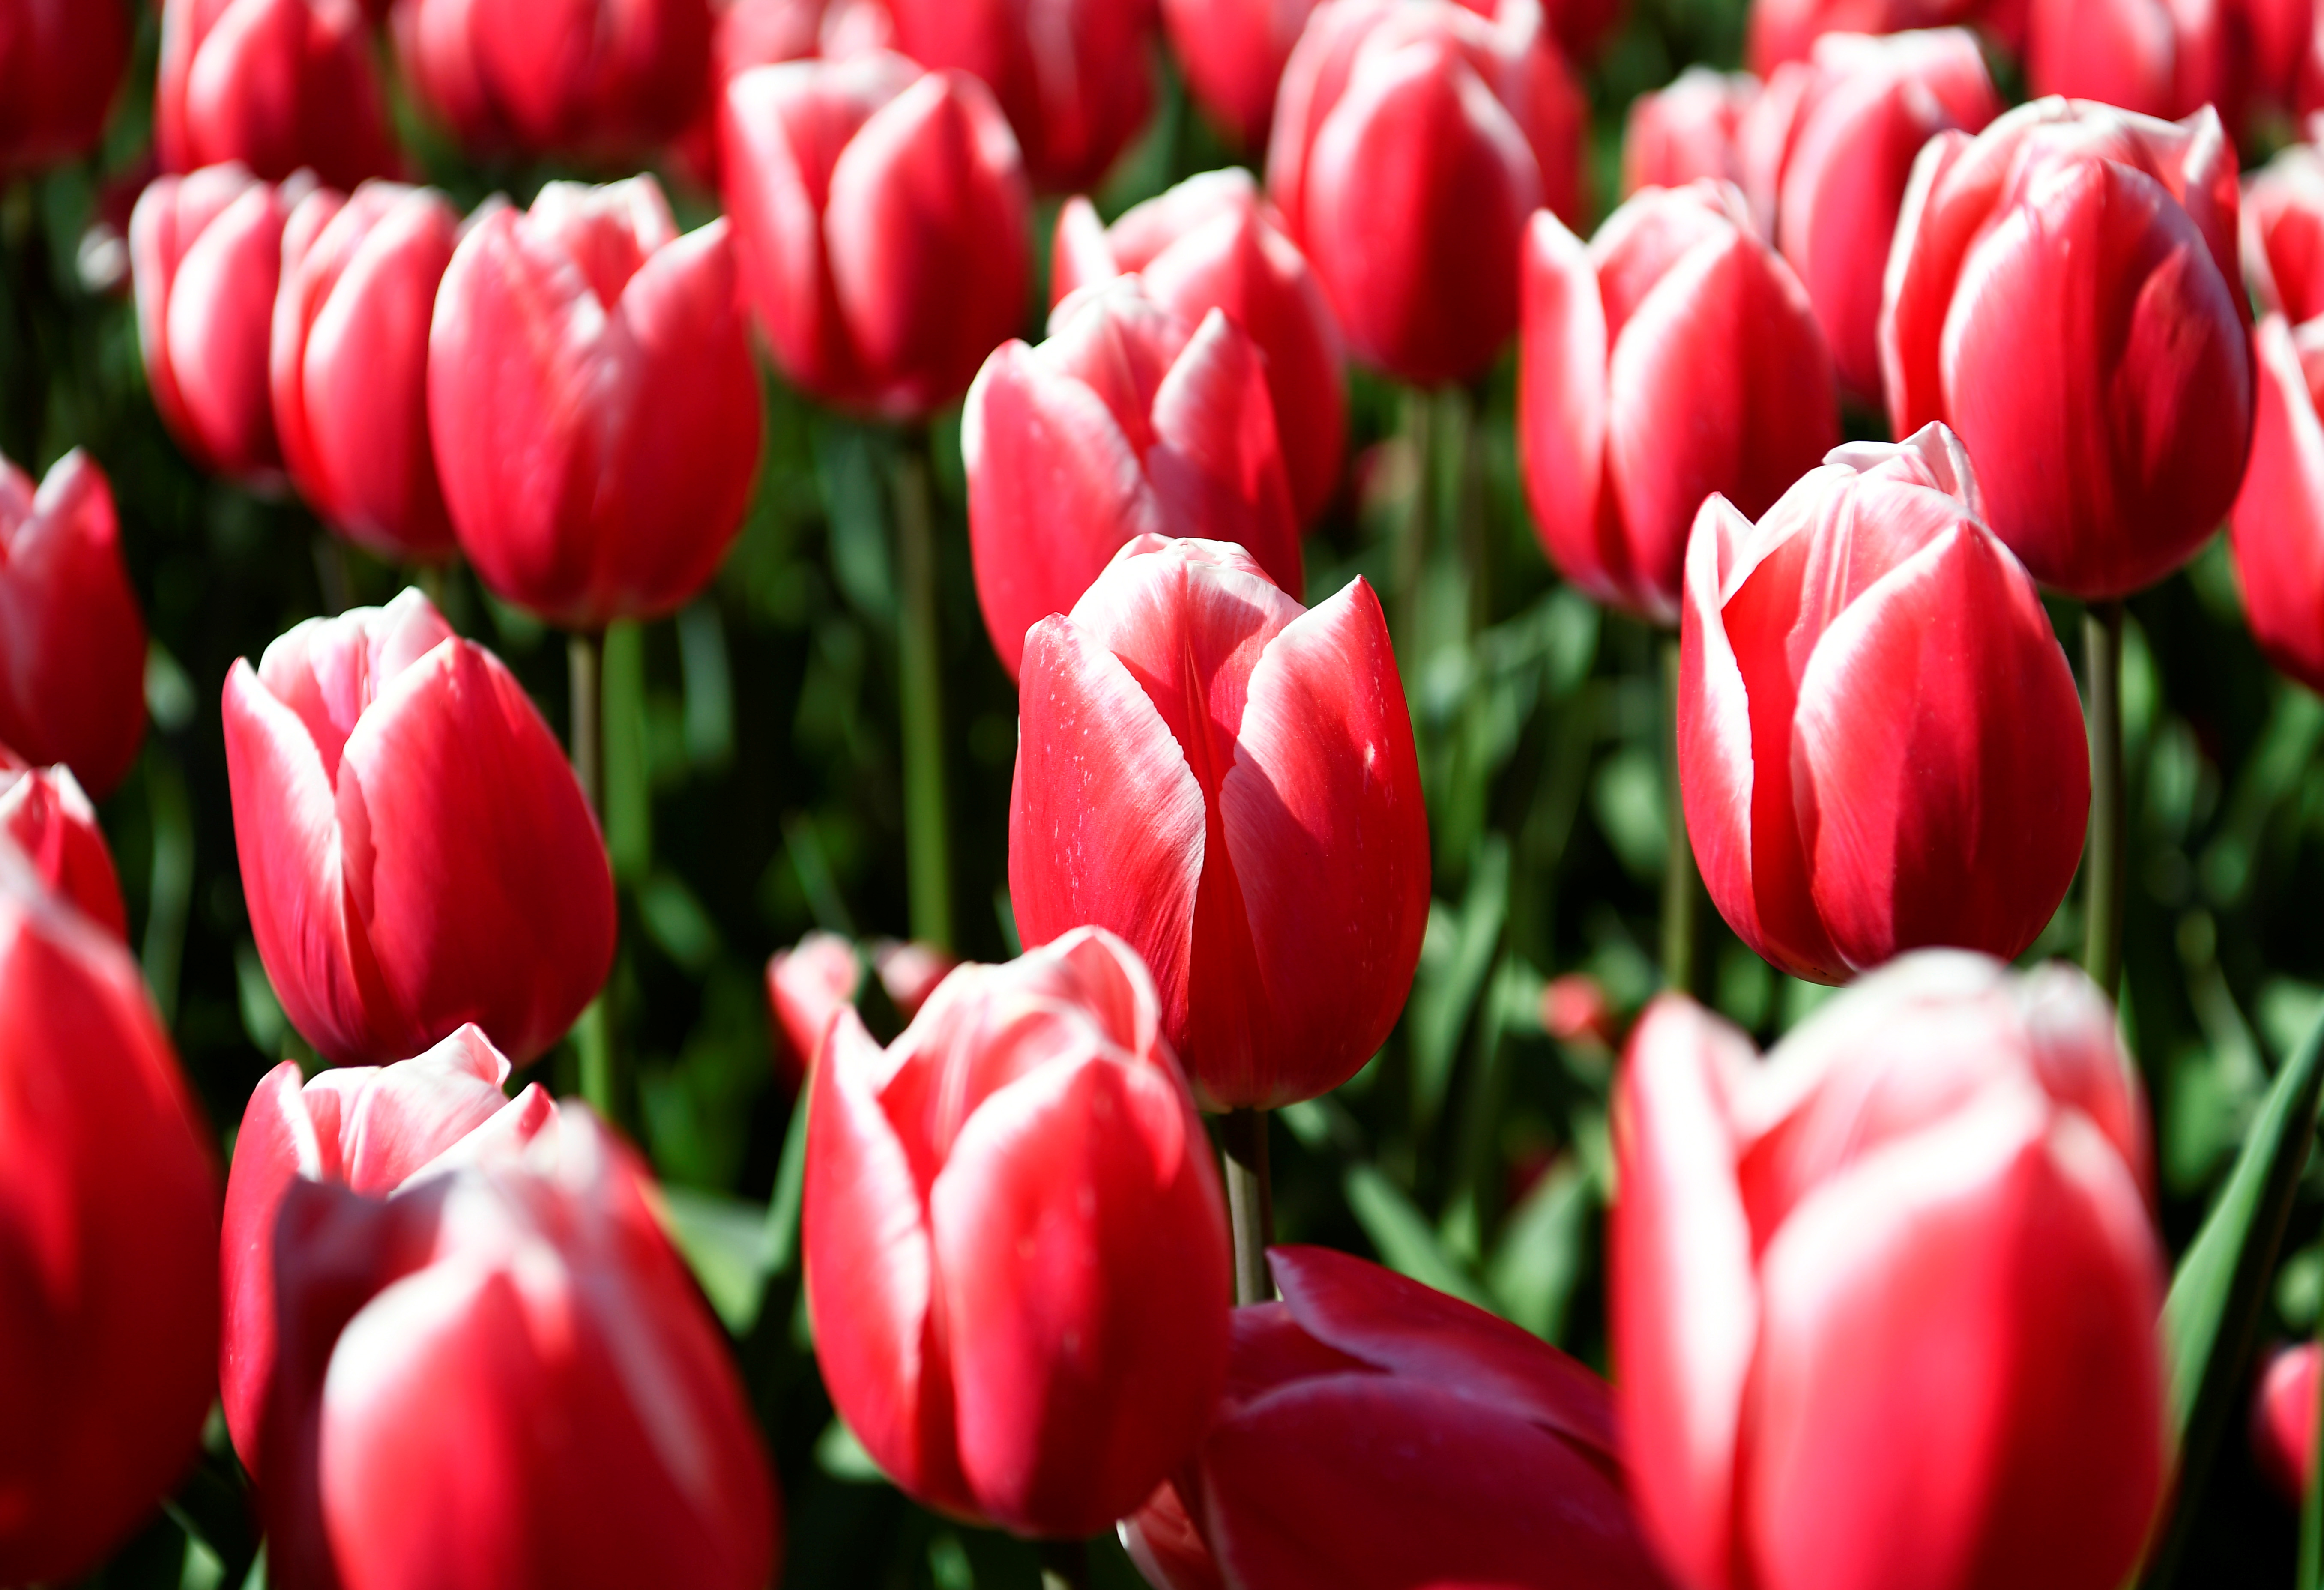 Tulips are seen at the Keukenhof park in Lisse